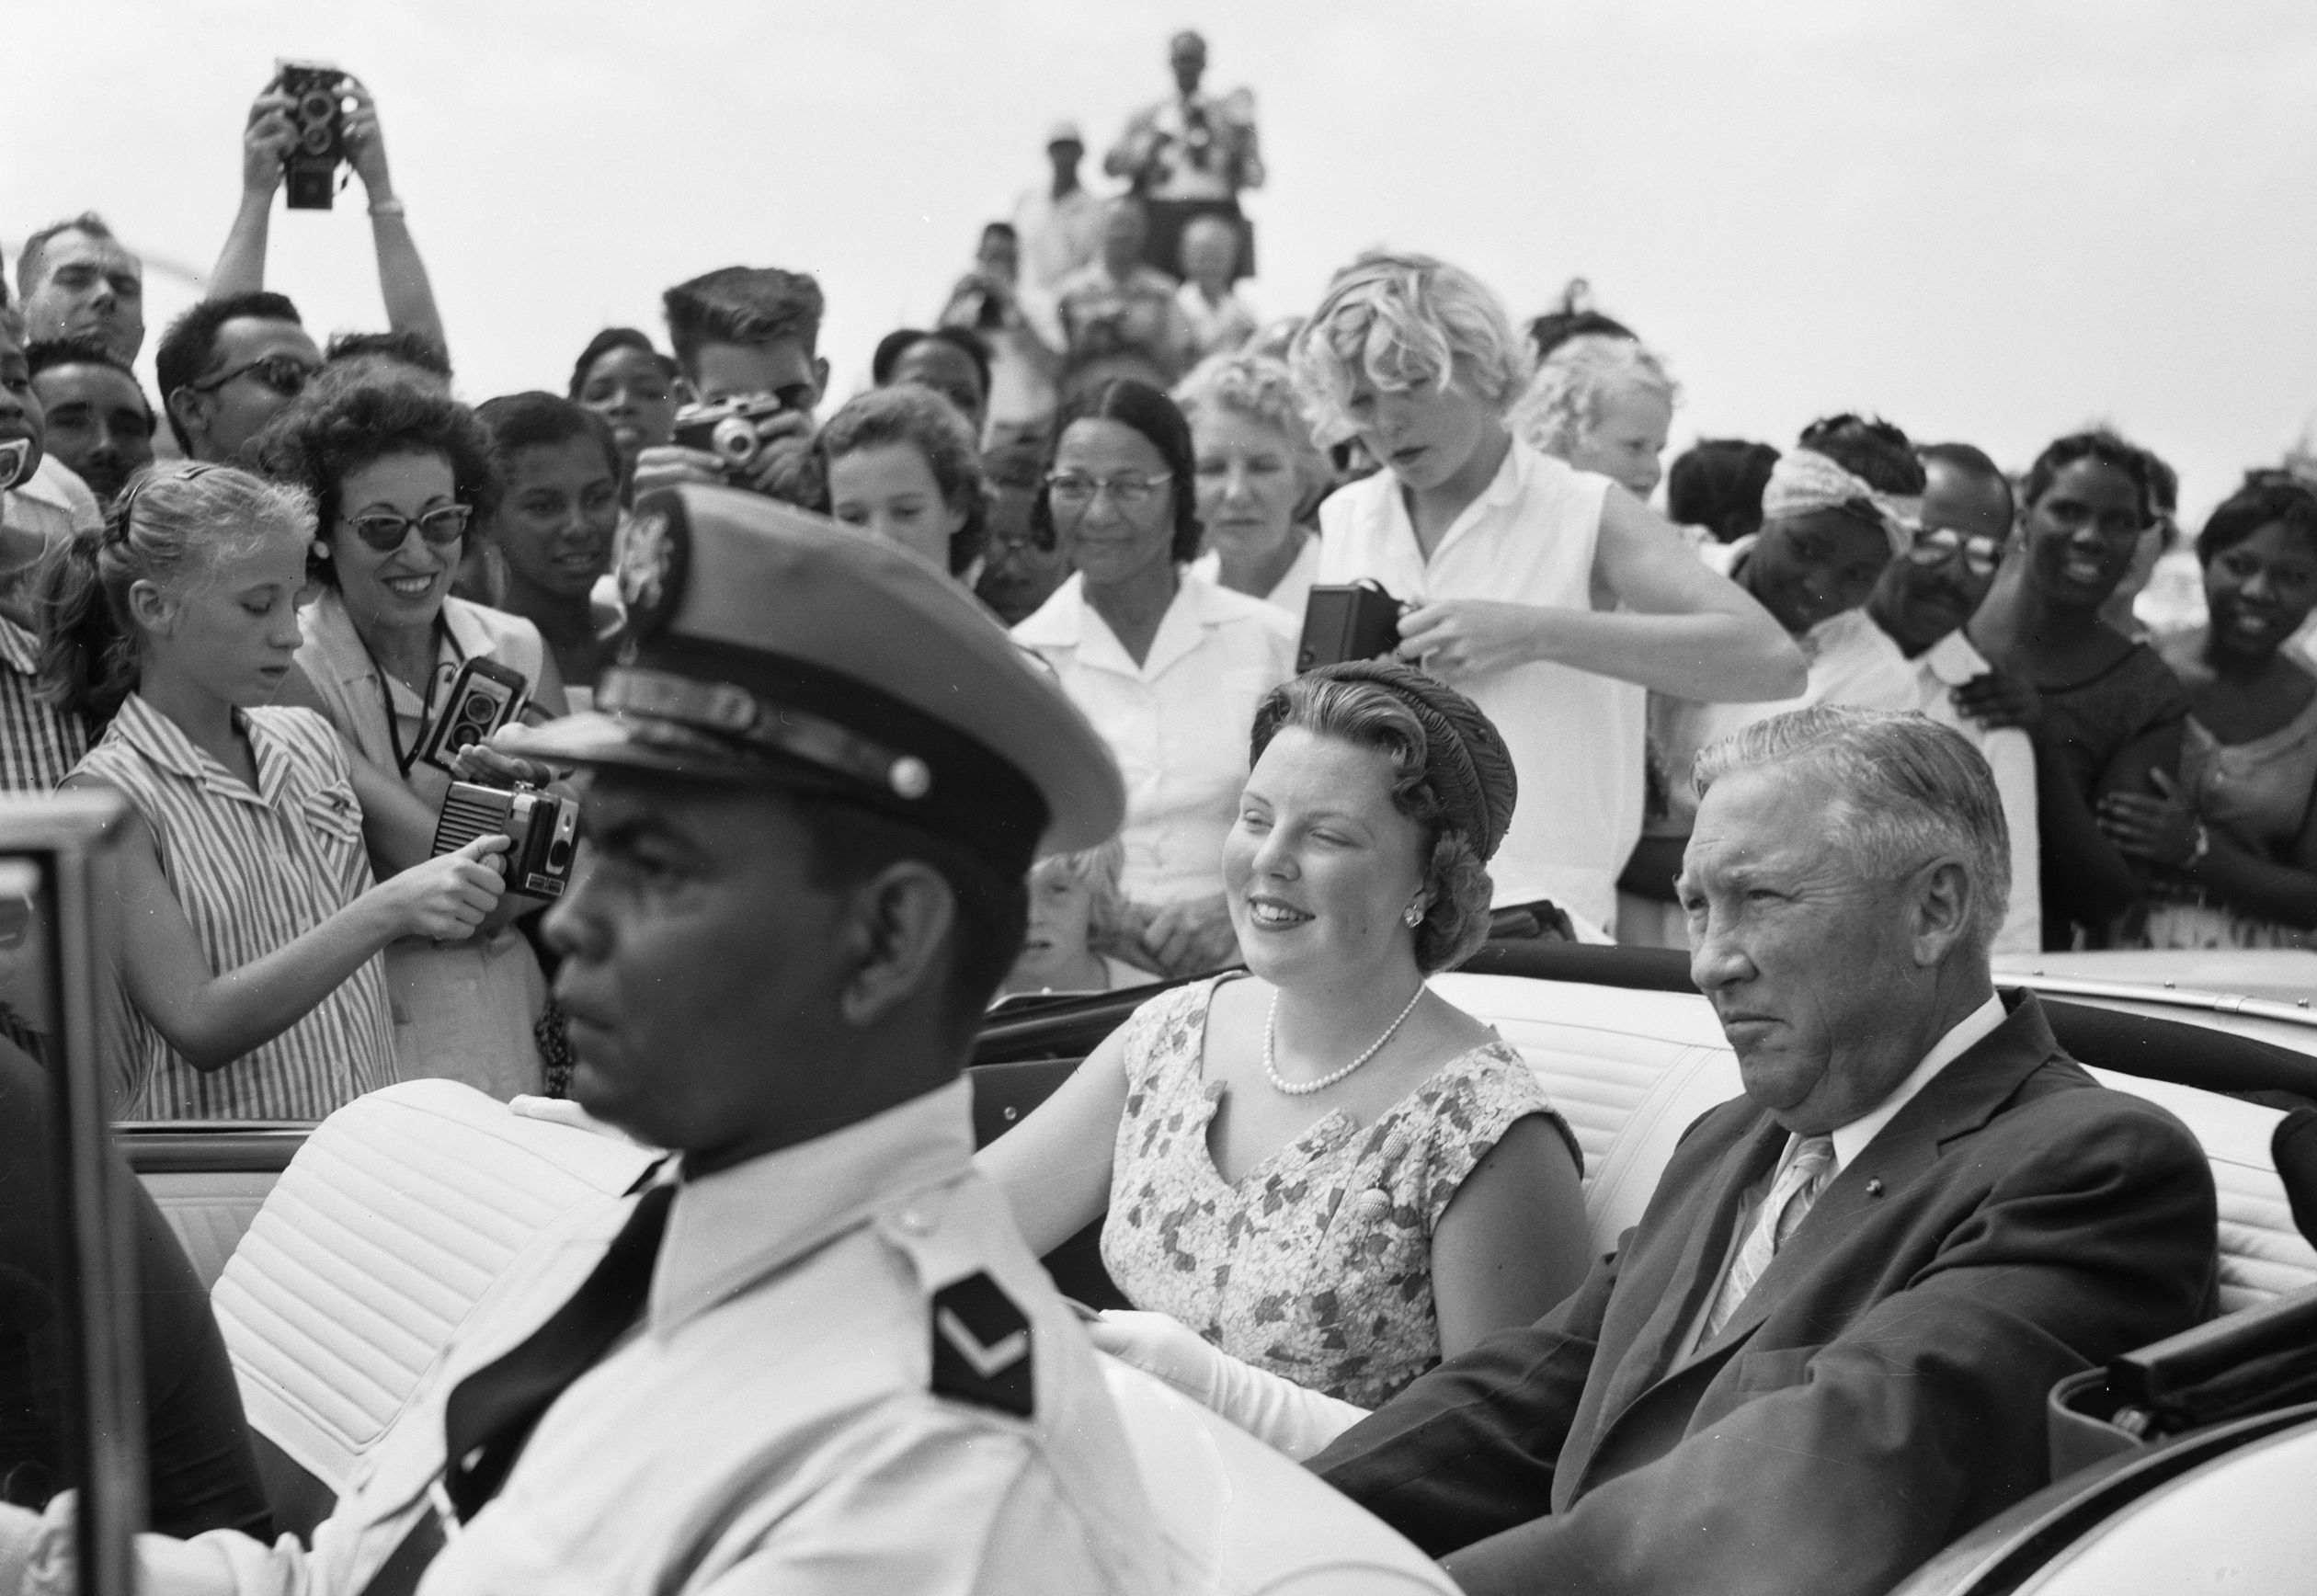 February 1958: At the age of 20, Beatrix visits the island of Aruba.  There she is warmly welcomed by a cheering crowd.